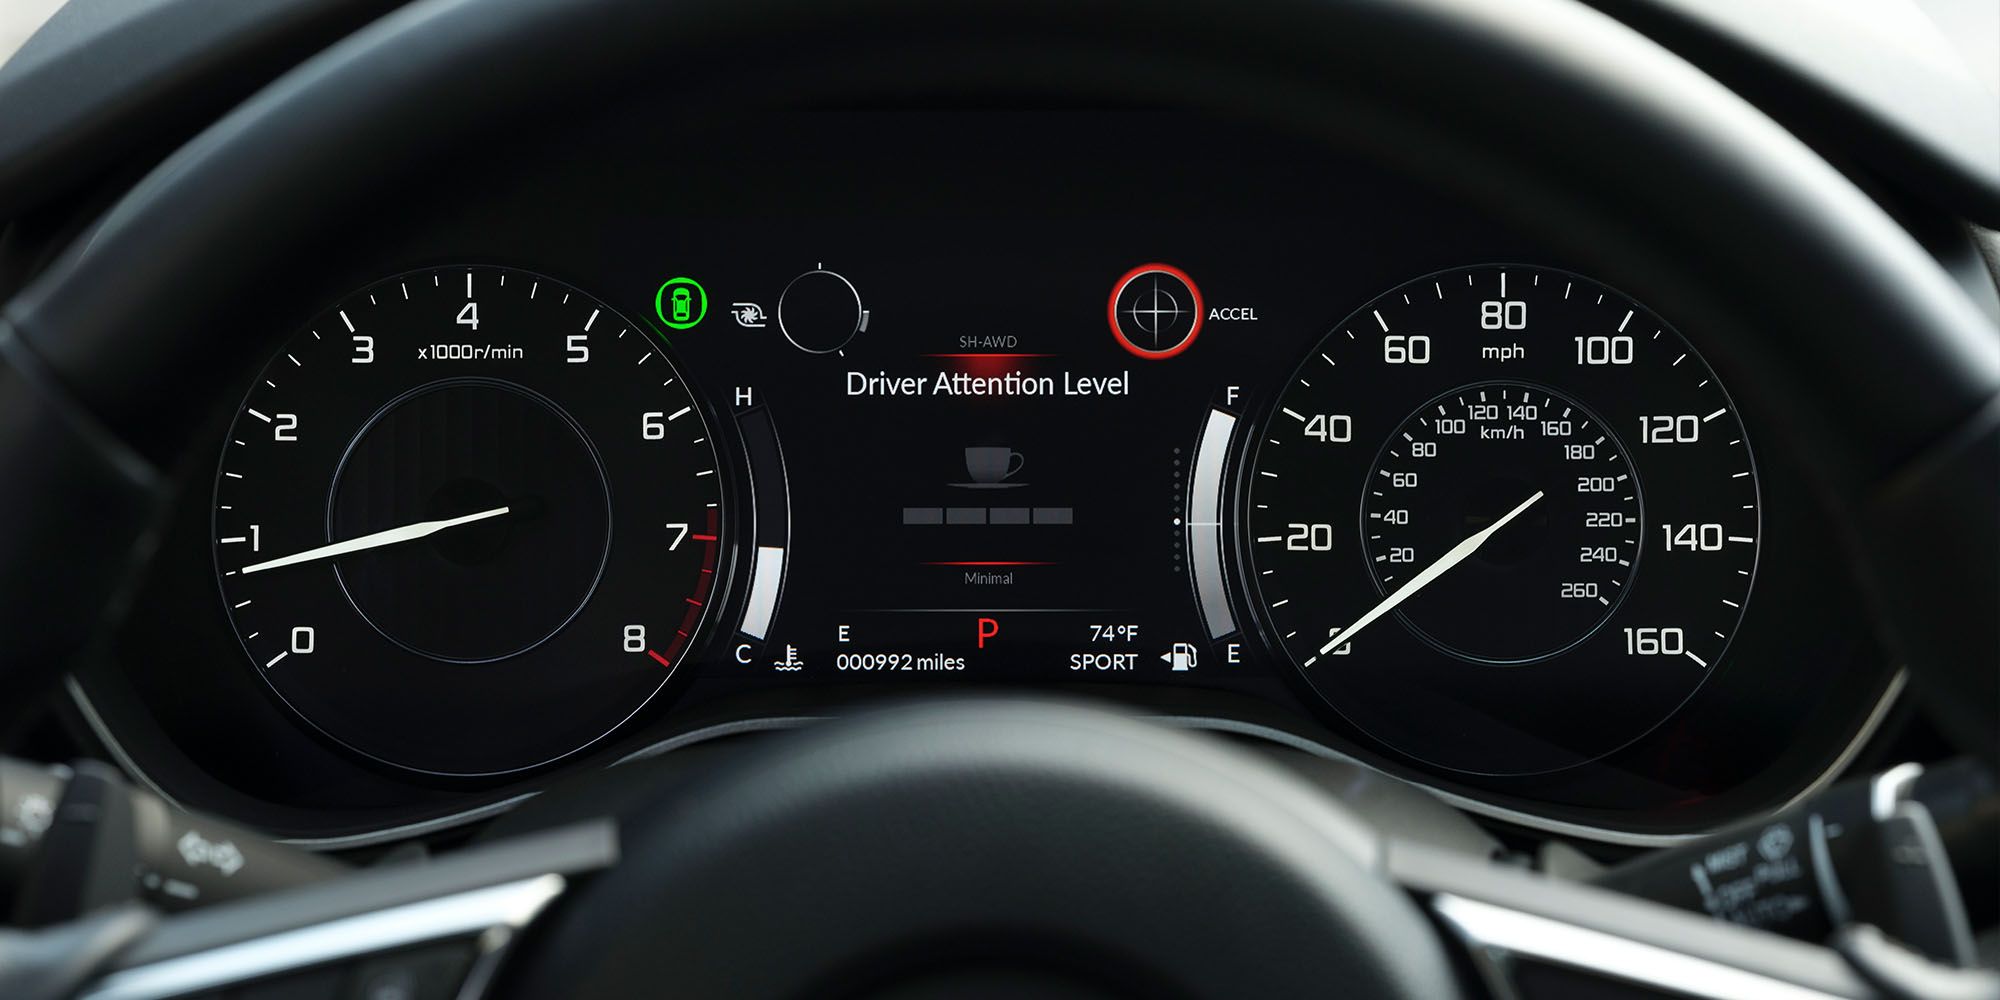 The gauge cluster in the more luxurious Advance trim level